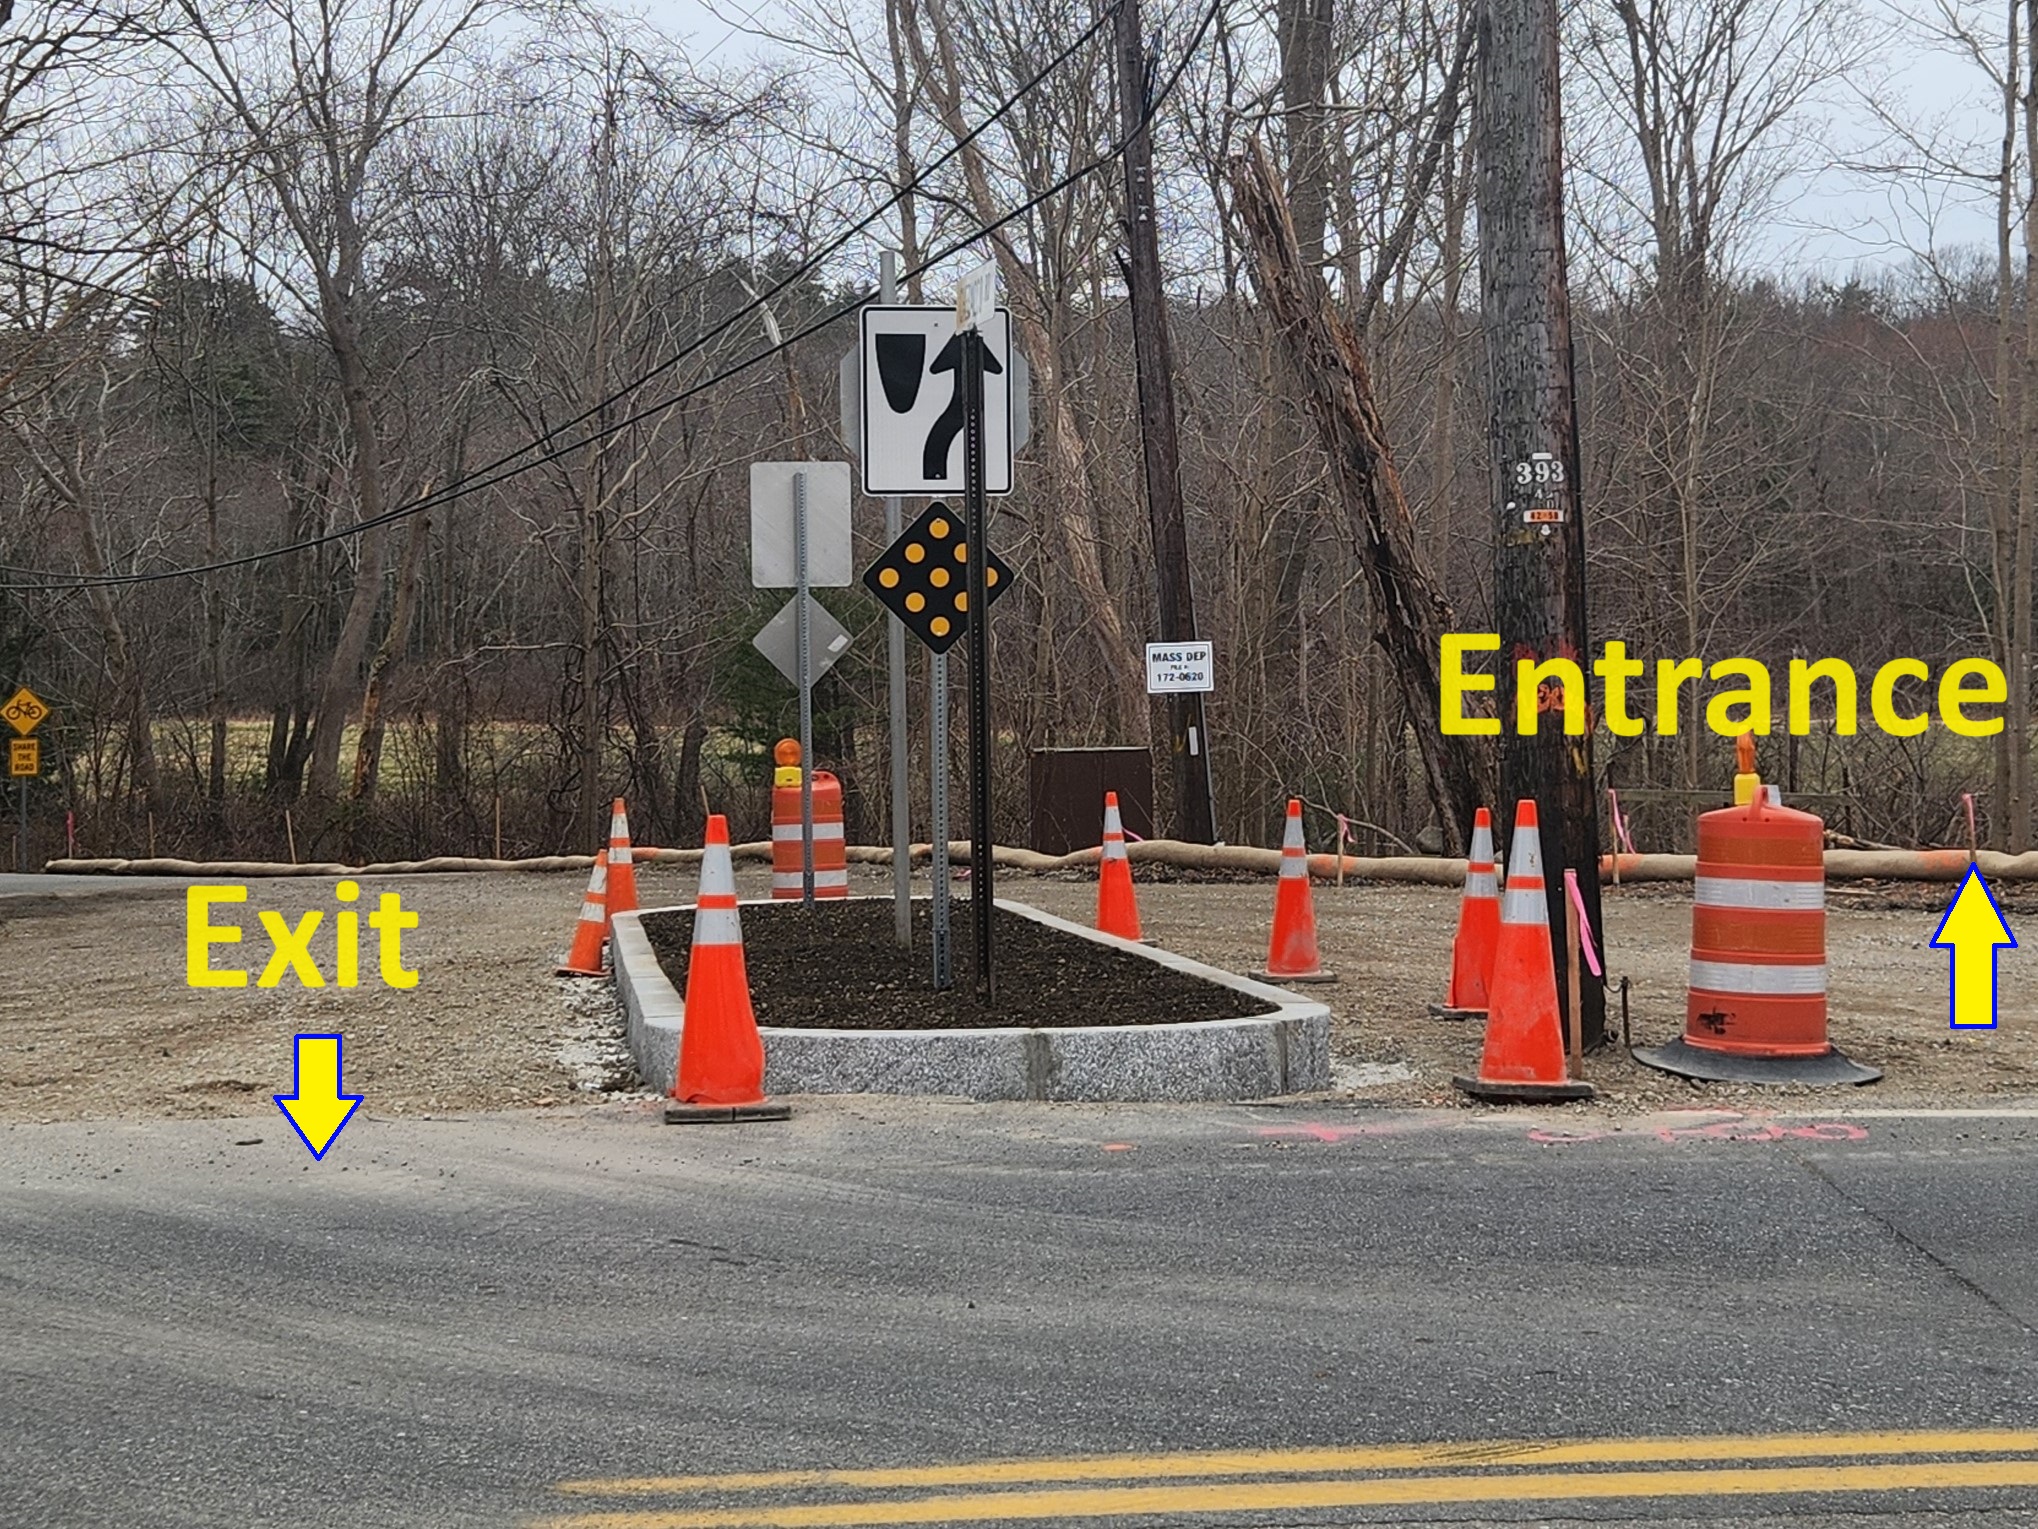 New traffic flow change for Chebacco Rd at Essex St intersection.